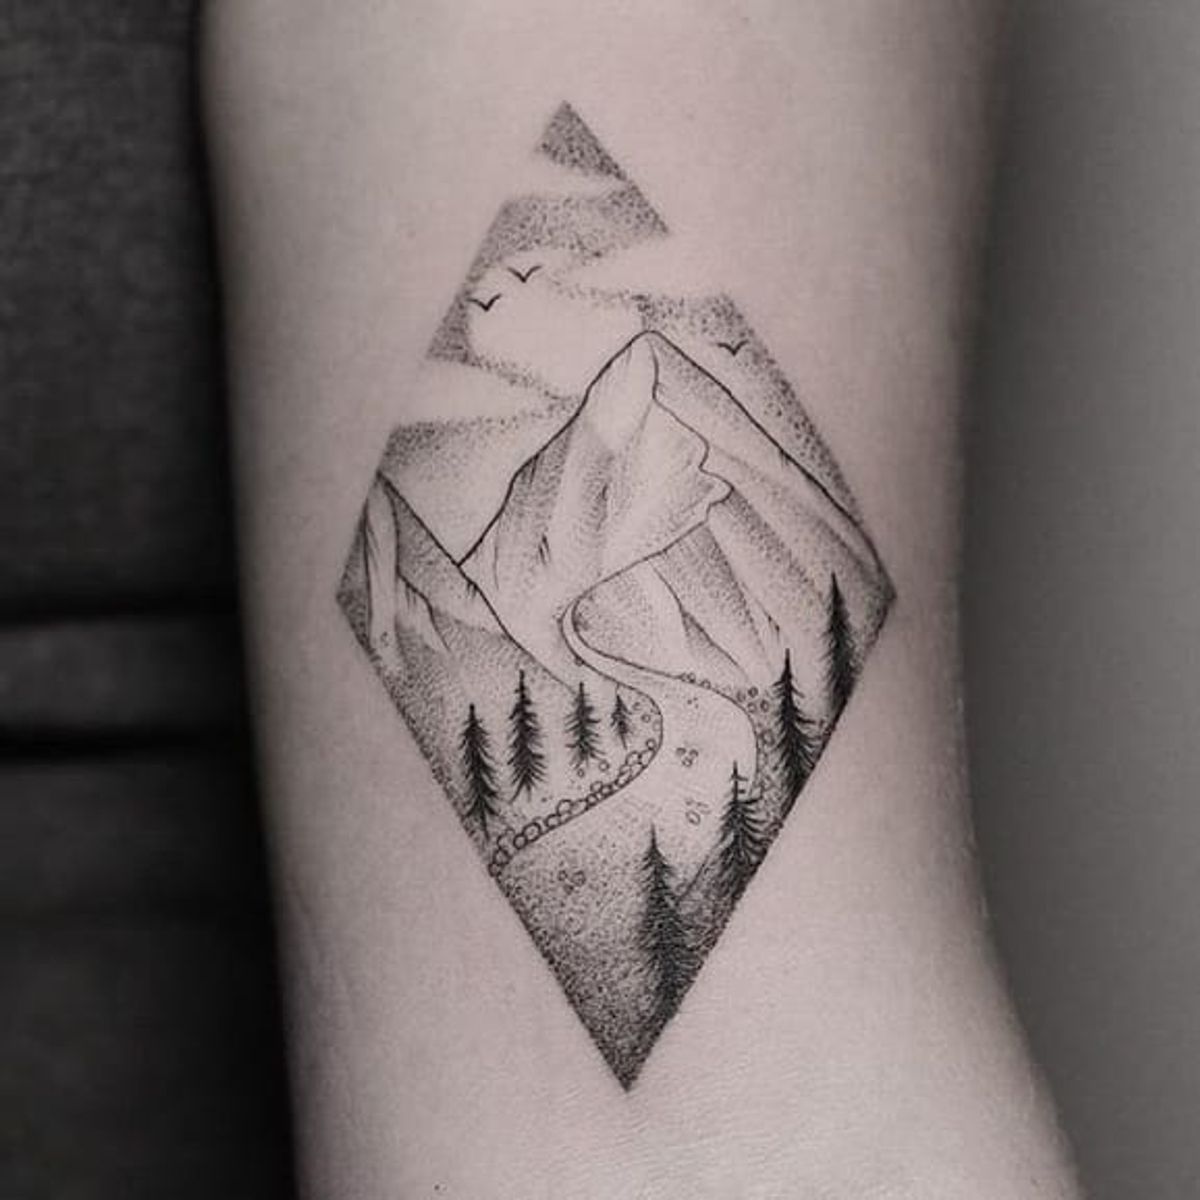 Tattoo uploaded by Ross Howerton • A winding mountain road by Hannah ...